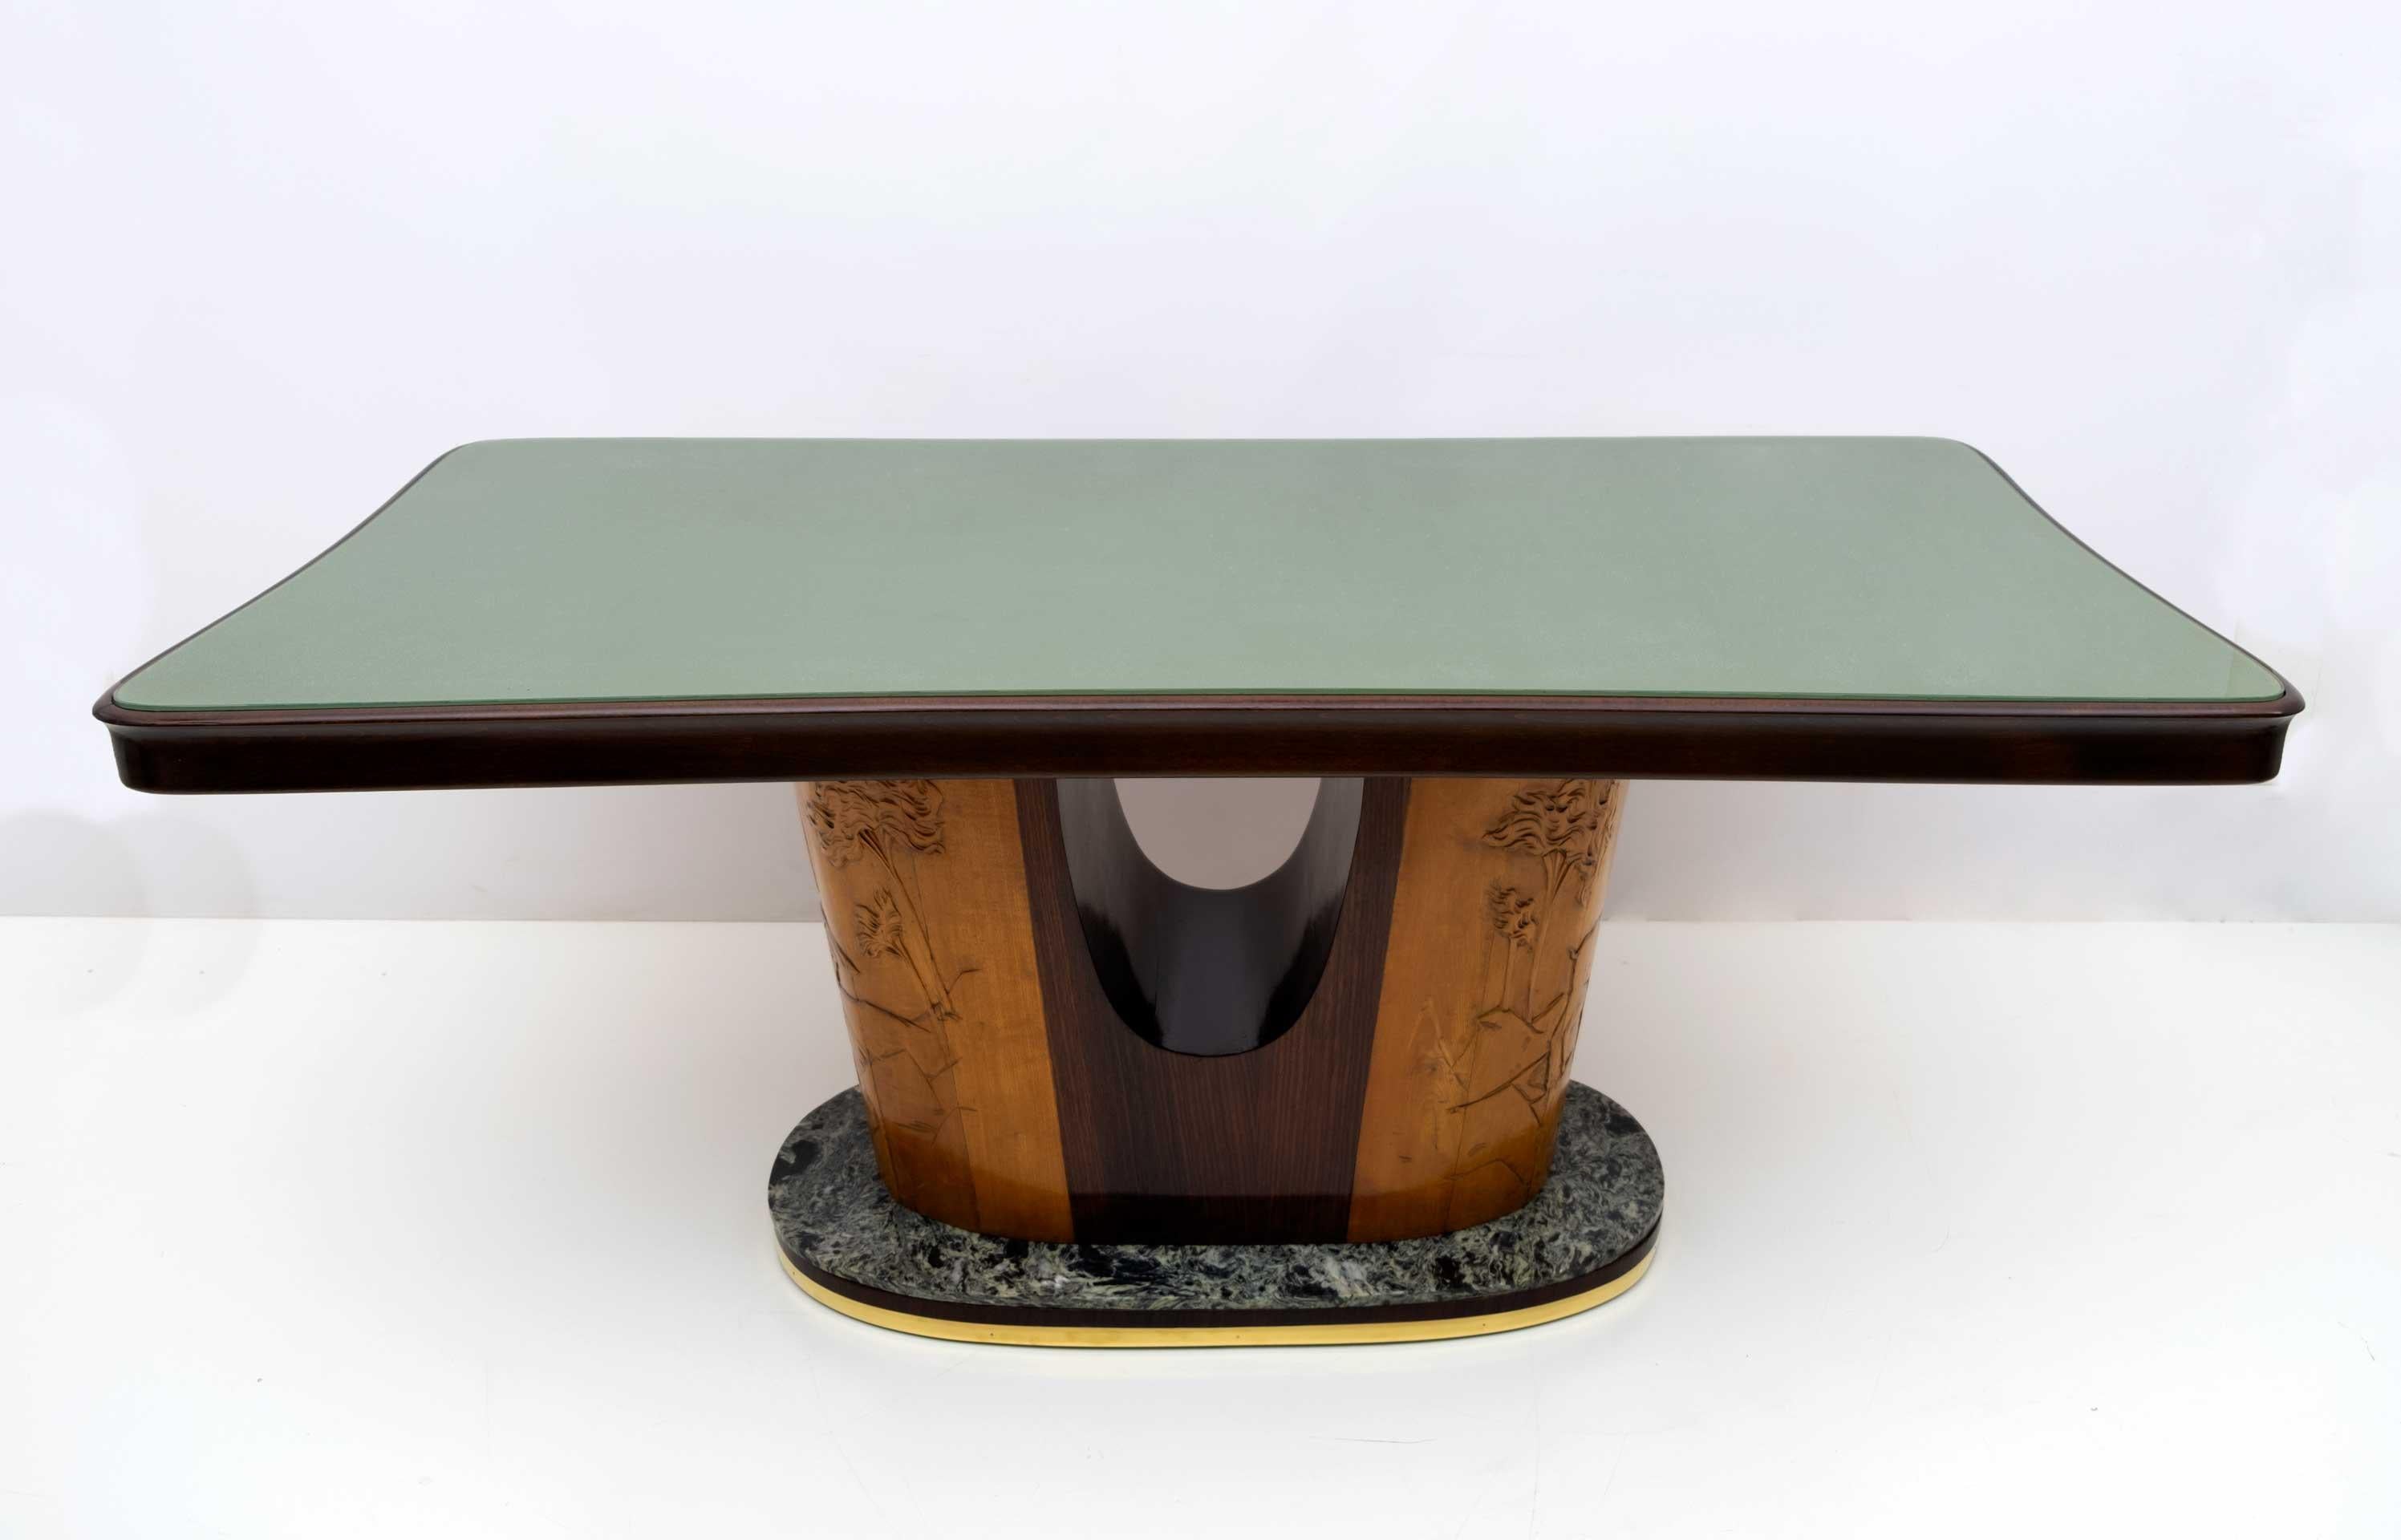 Beautiful table designed by the famous Italian Mid-Century Modern designer Vittorio Dassi, 1950.
The exceptional woodwork is highlighted by the curved green glass top and the rounded edges of the structure. This Art Deco style piece is designed